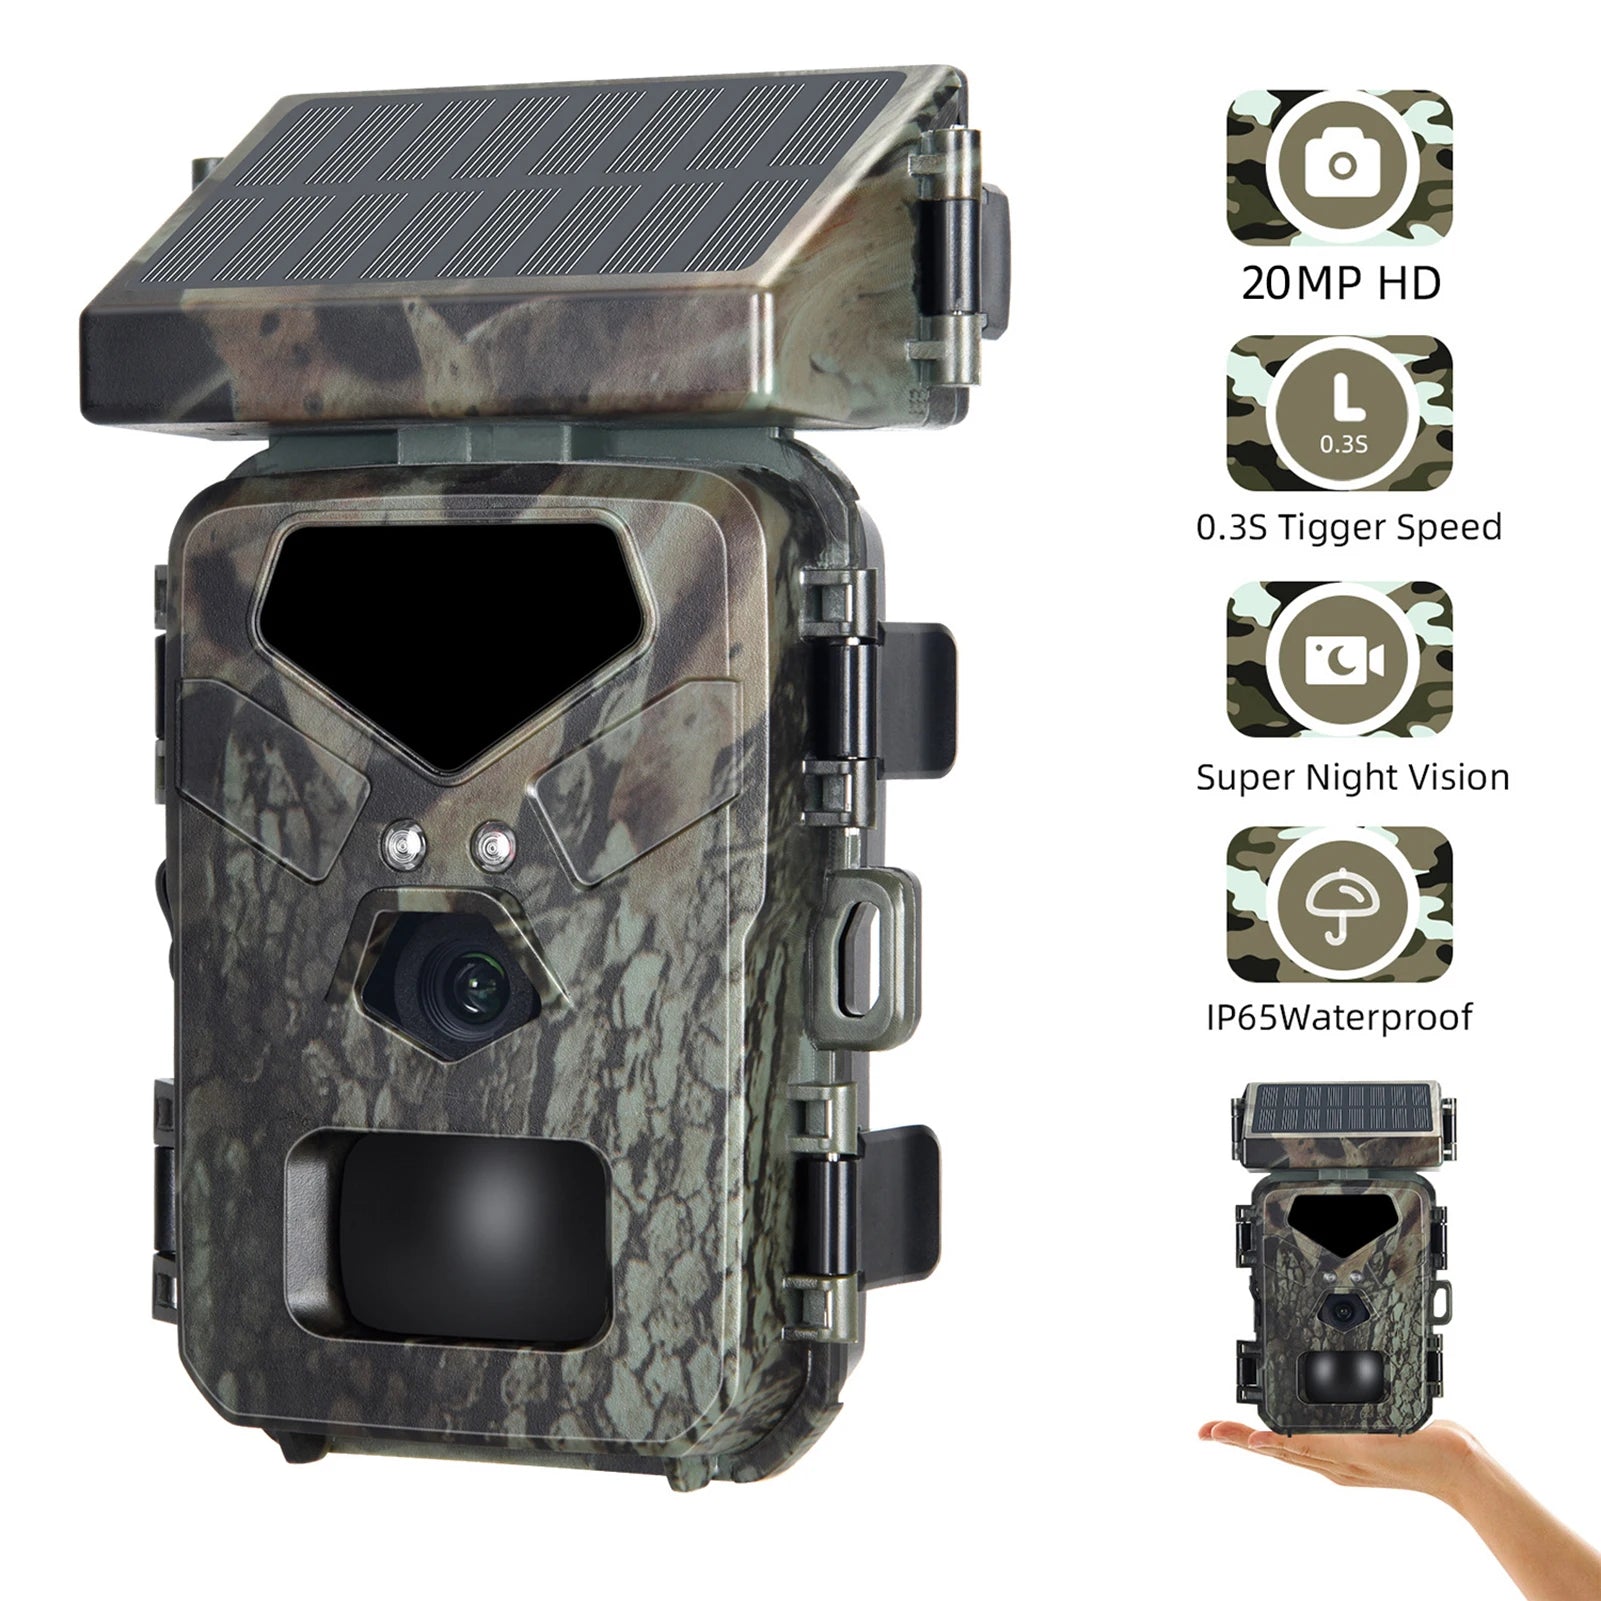 A solar trail camera with camouflage design, equipped with a solar panel on top, boasting features like 20MP HD resolution, 0.35s trigger speed, super night vision, and IP65 waterproof rating.